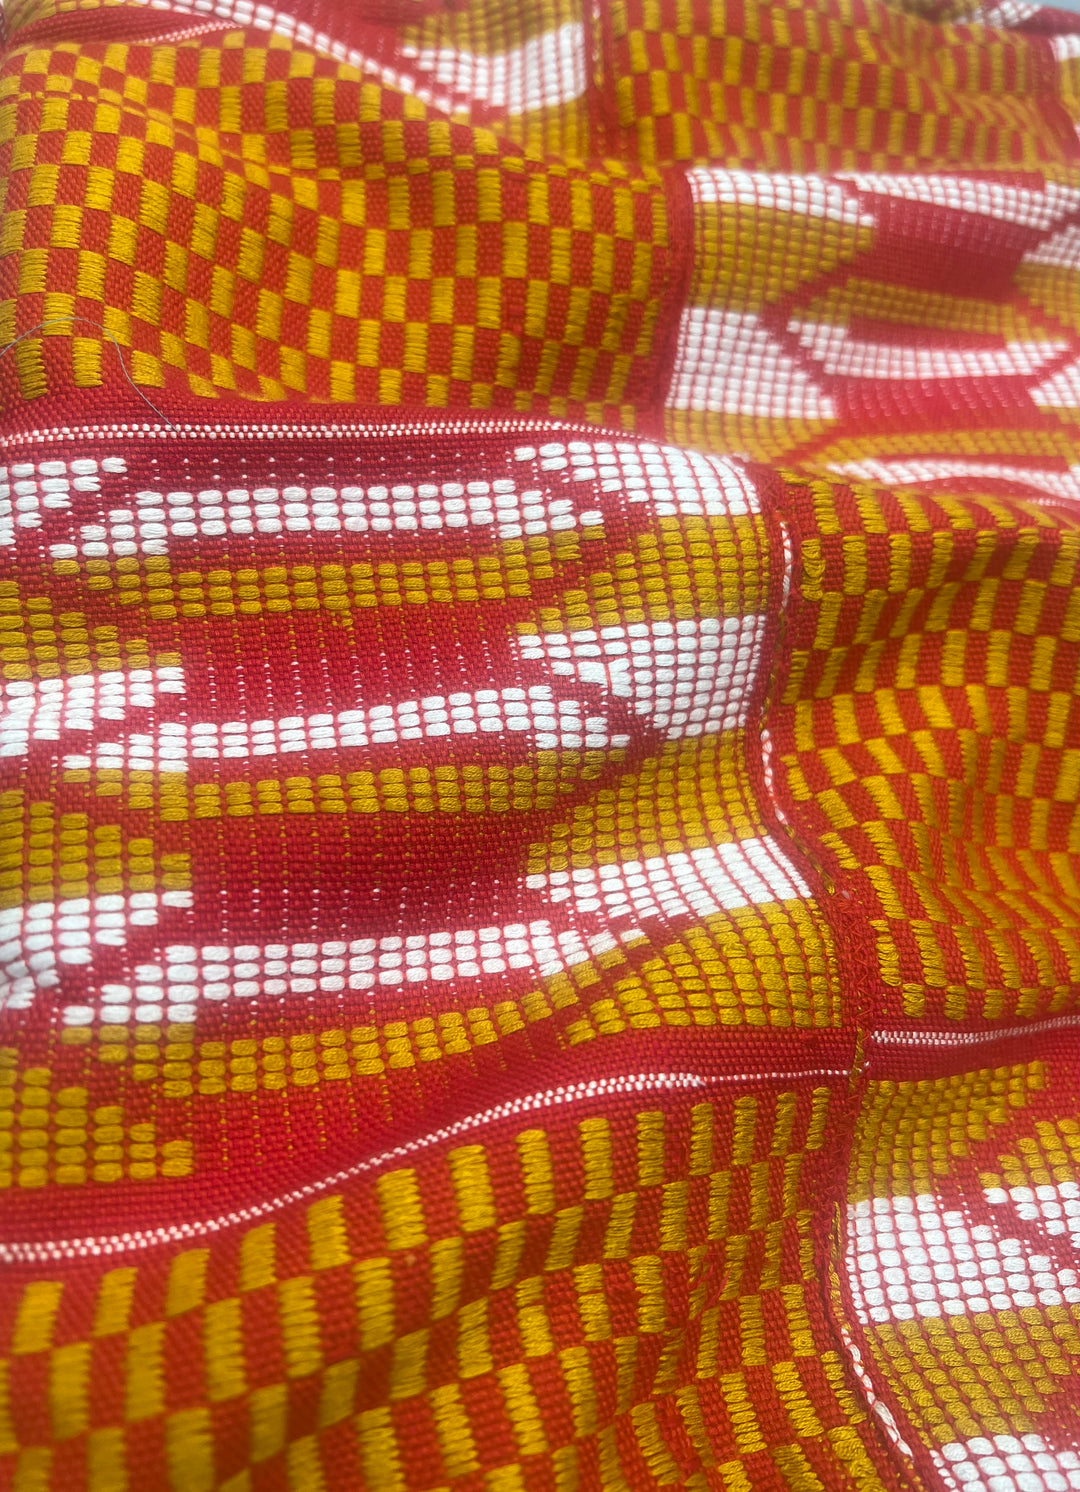 The vibrant Kente patterns featured on the pillow are a celebration of Ghanaian culture and craftsmanship. 